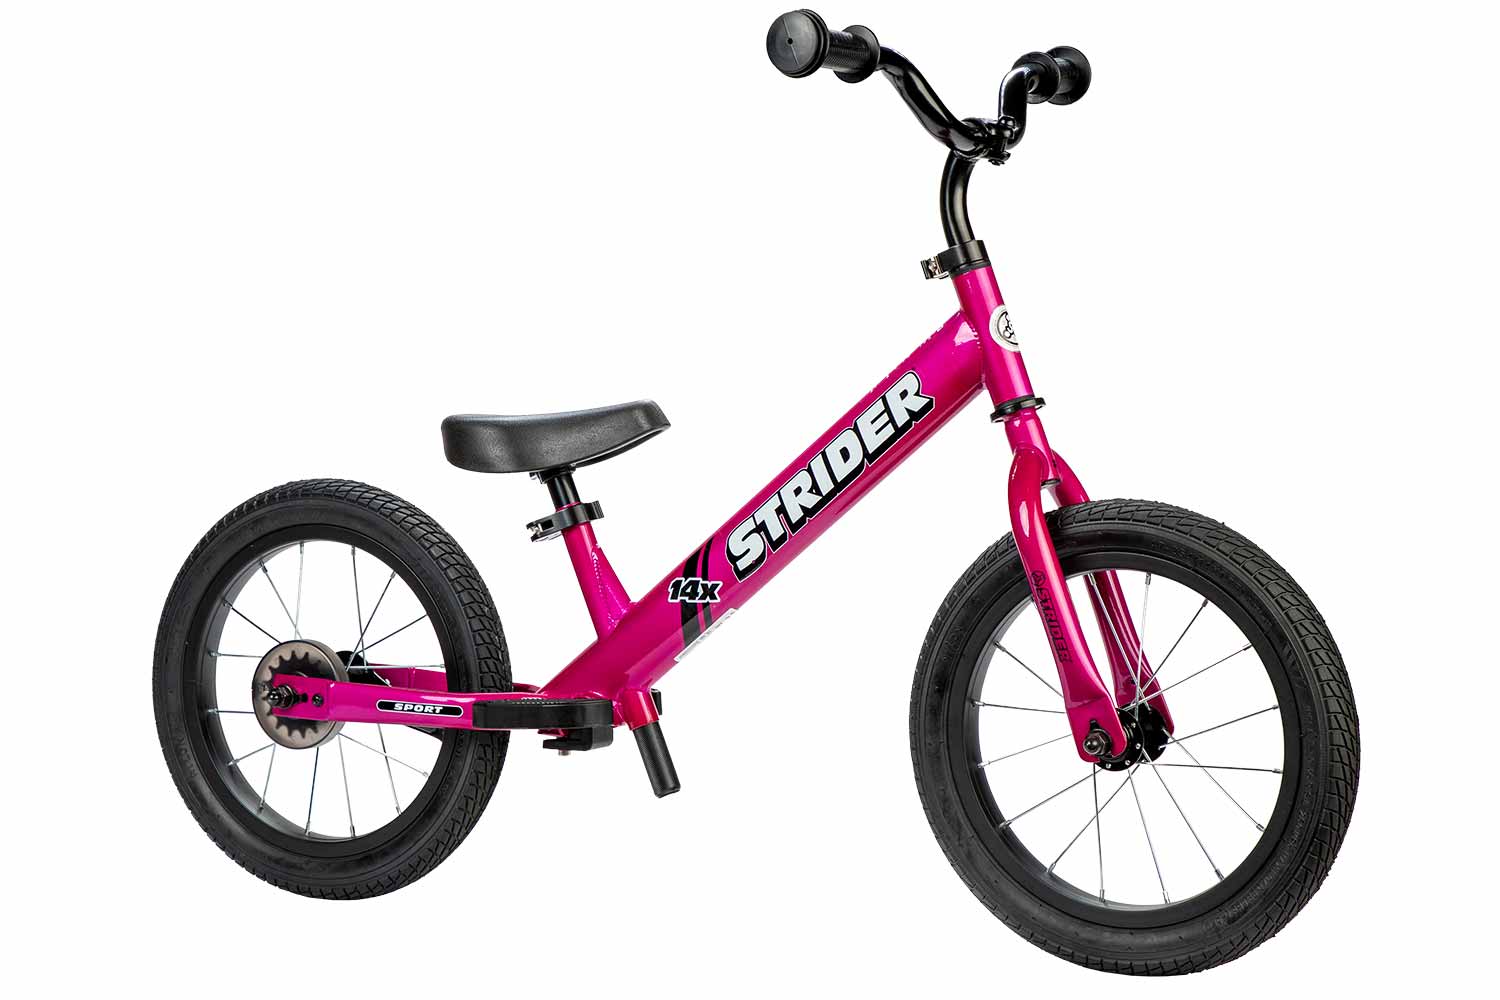 Strider 14x | Balance to Pedal Bike | Free Shipping Over $200